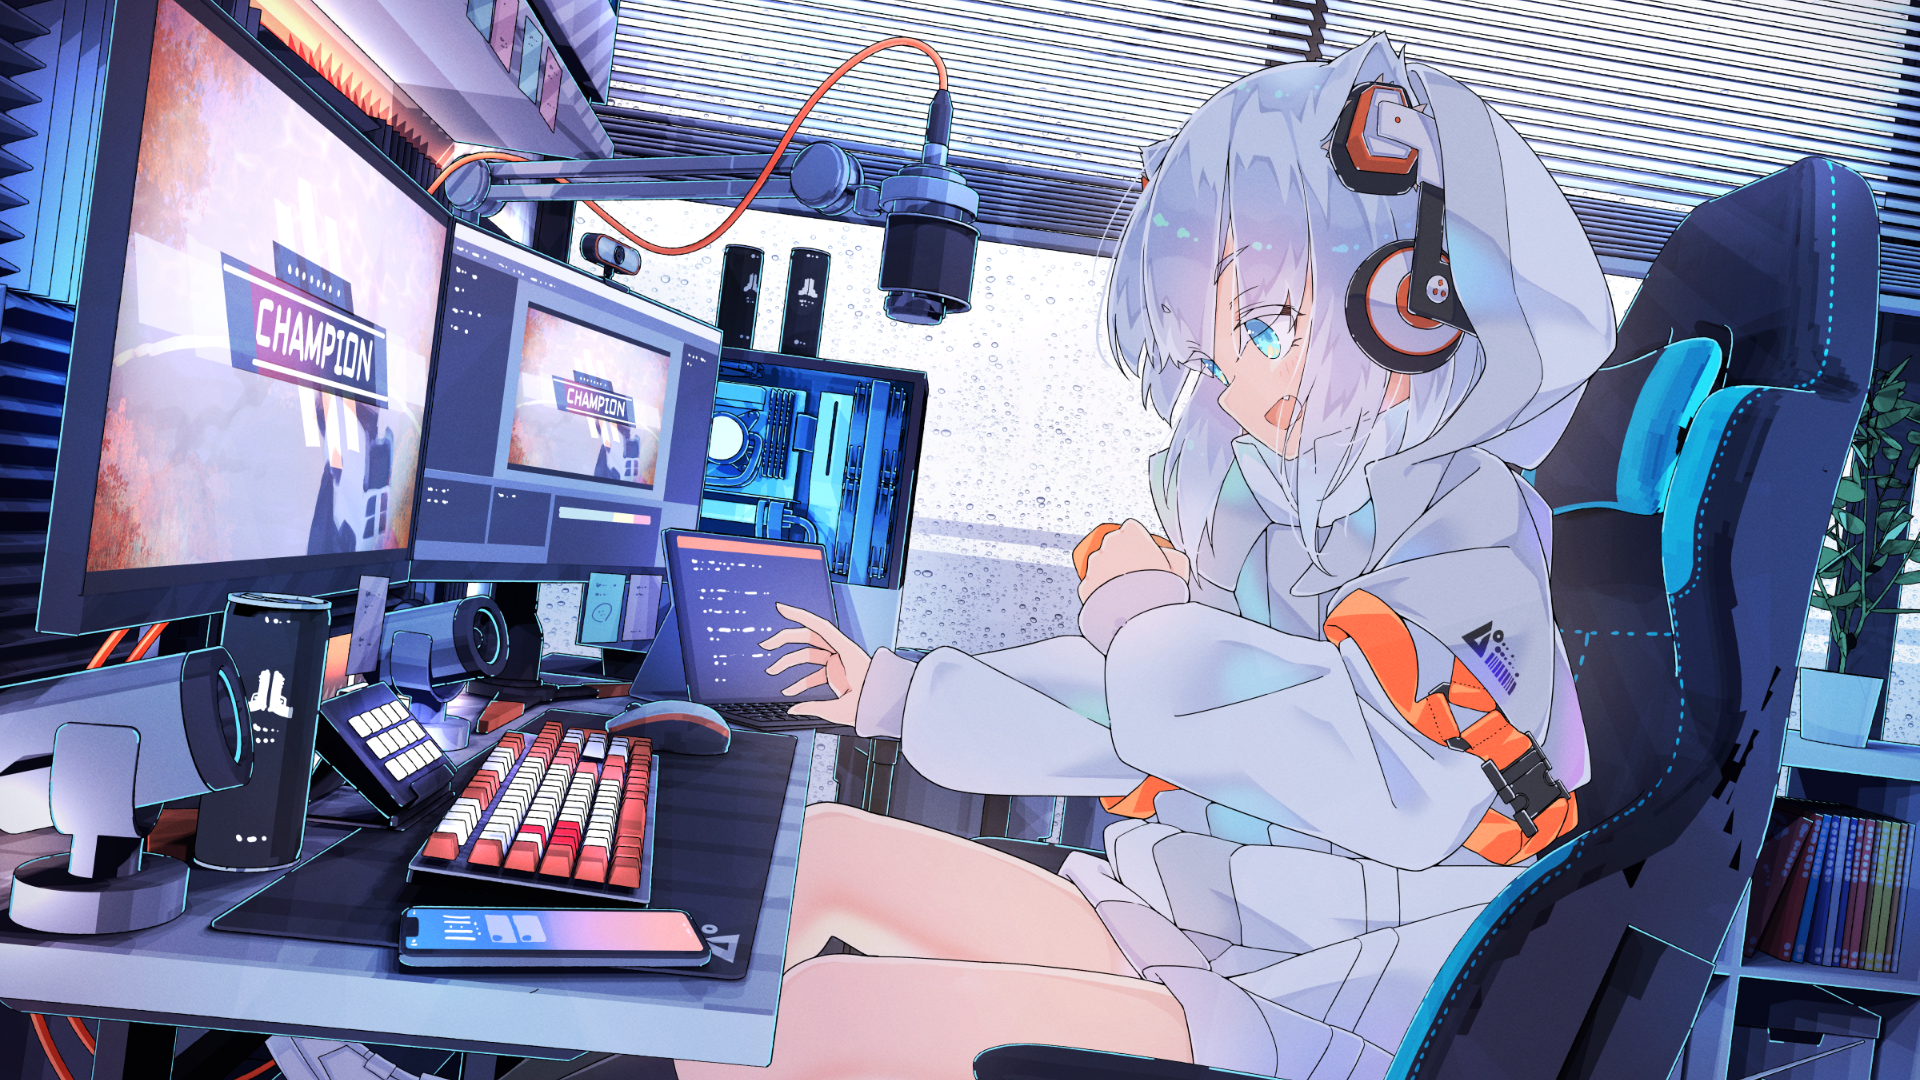 Silver Hair Anime Girls Anime Eyes Headsets Playing PC Gaming Computer Phone 1920x1080